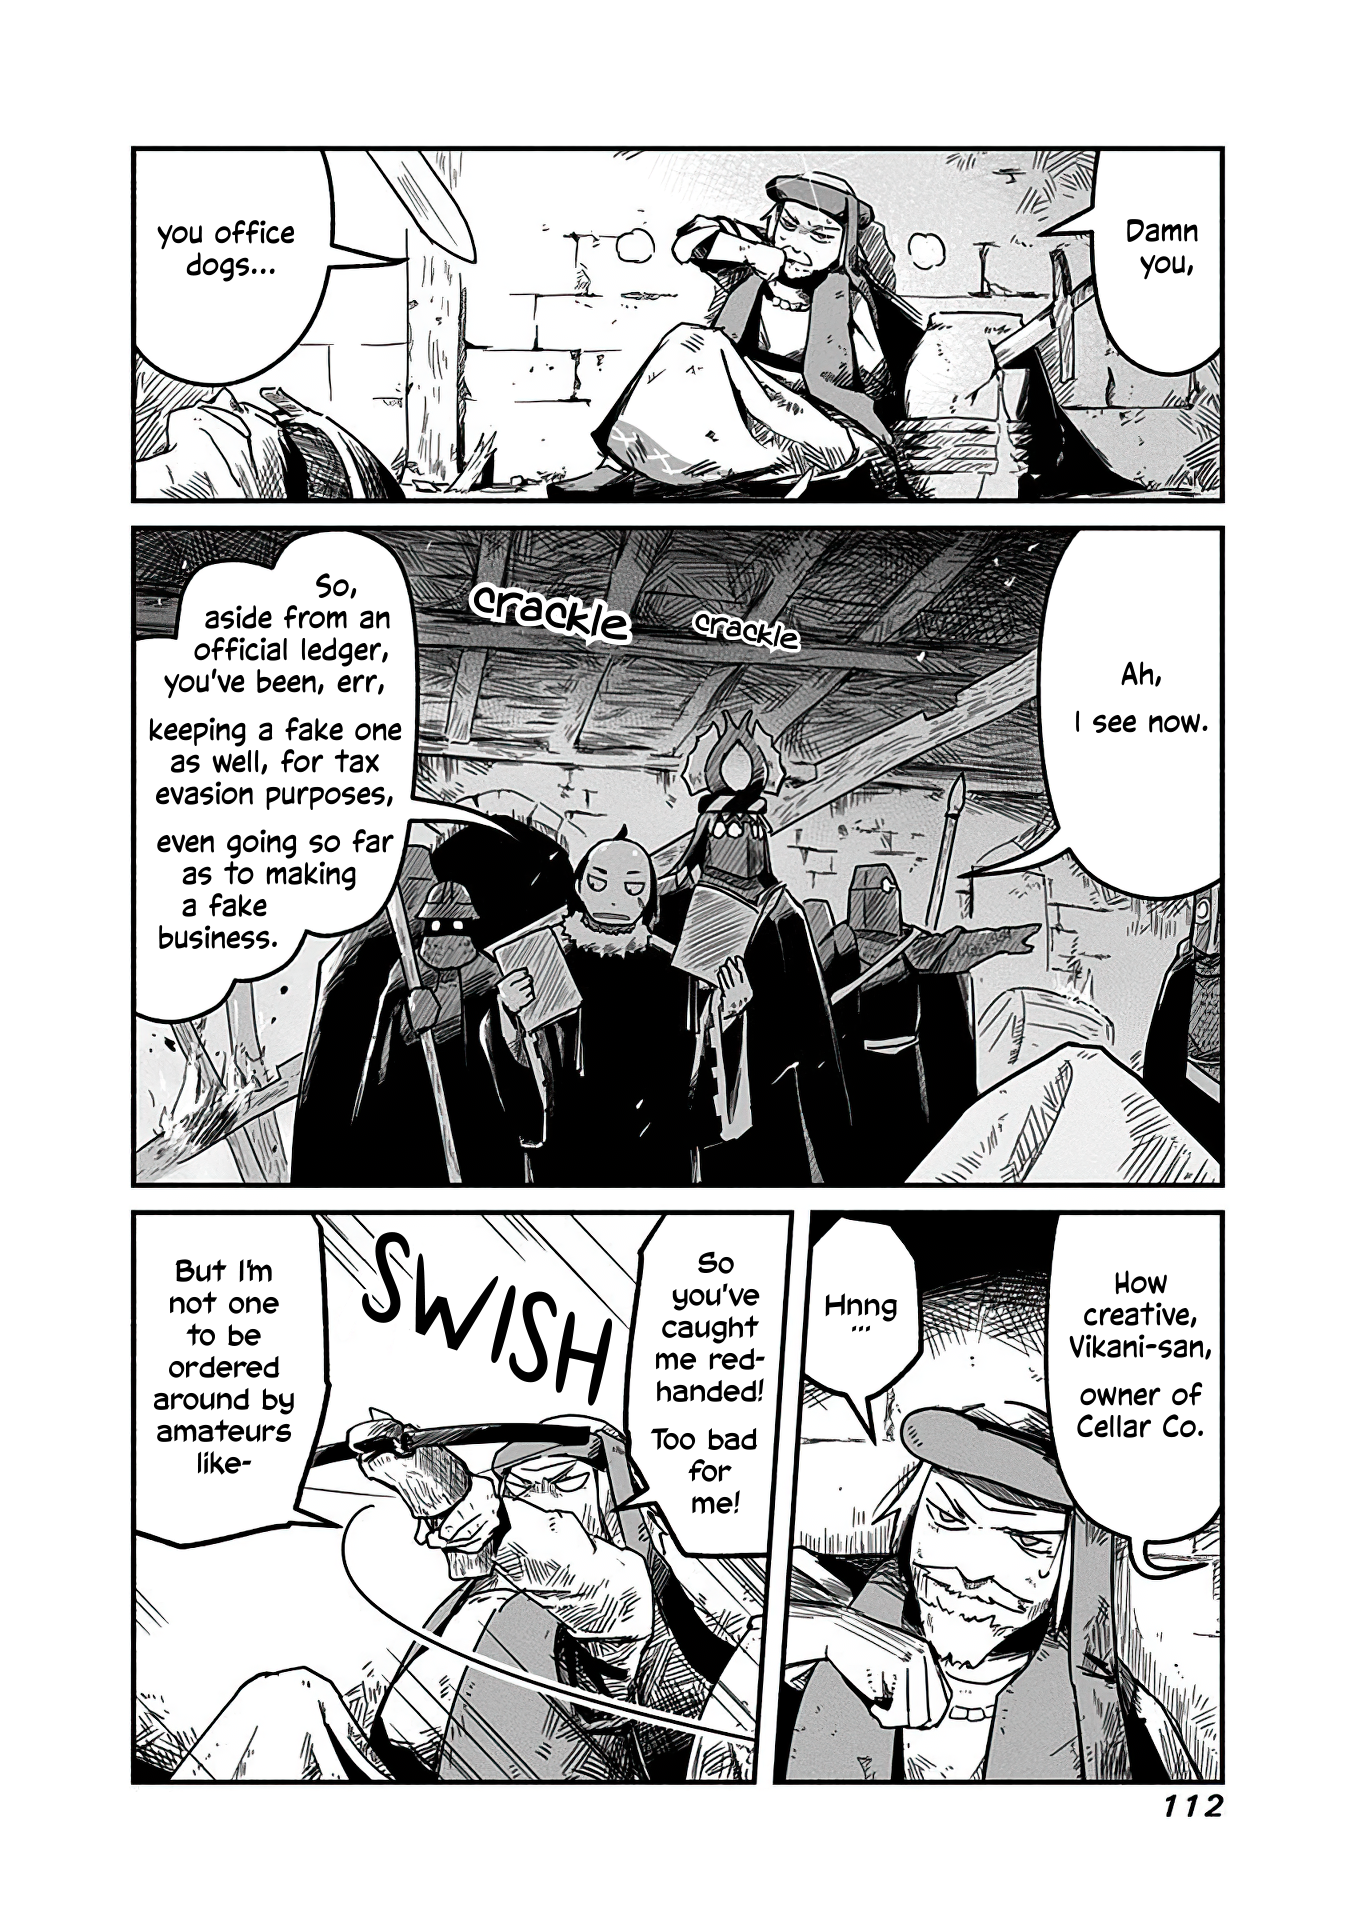 The Dragon, The Hero, And The Courier Vol.2 Chapter 12: The Sword, The Armor, And The Prosperous Society - Picture 3